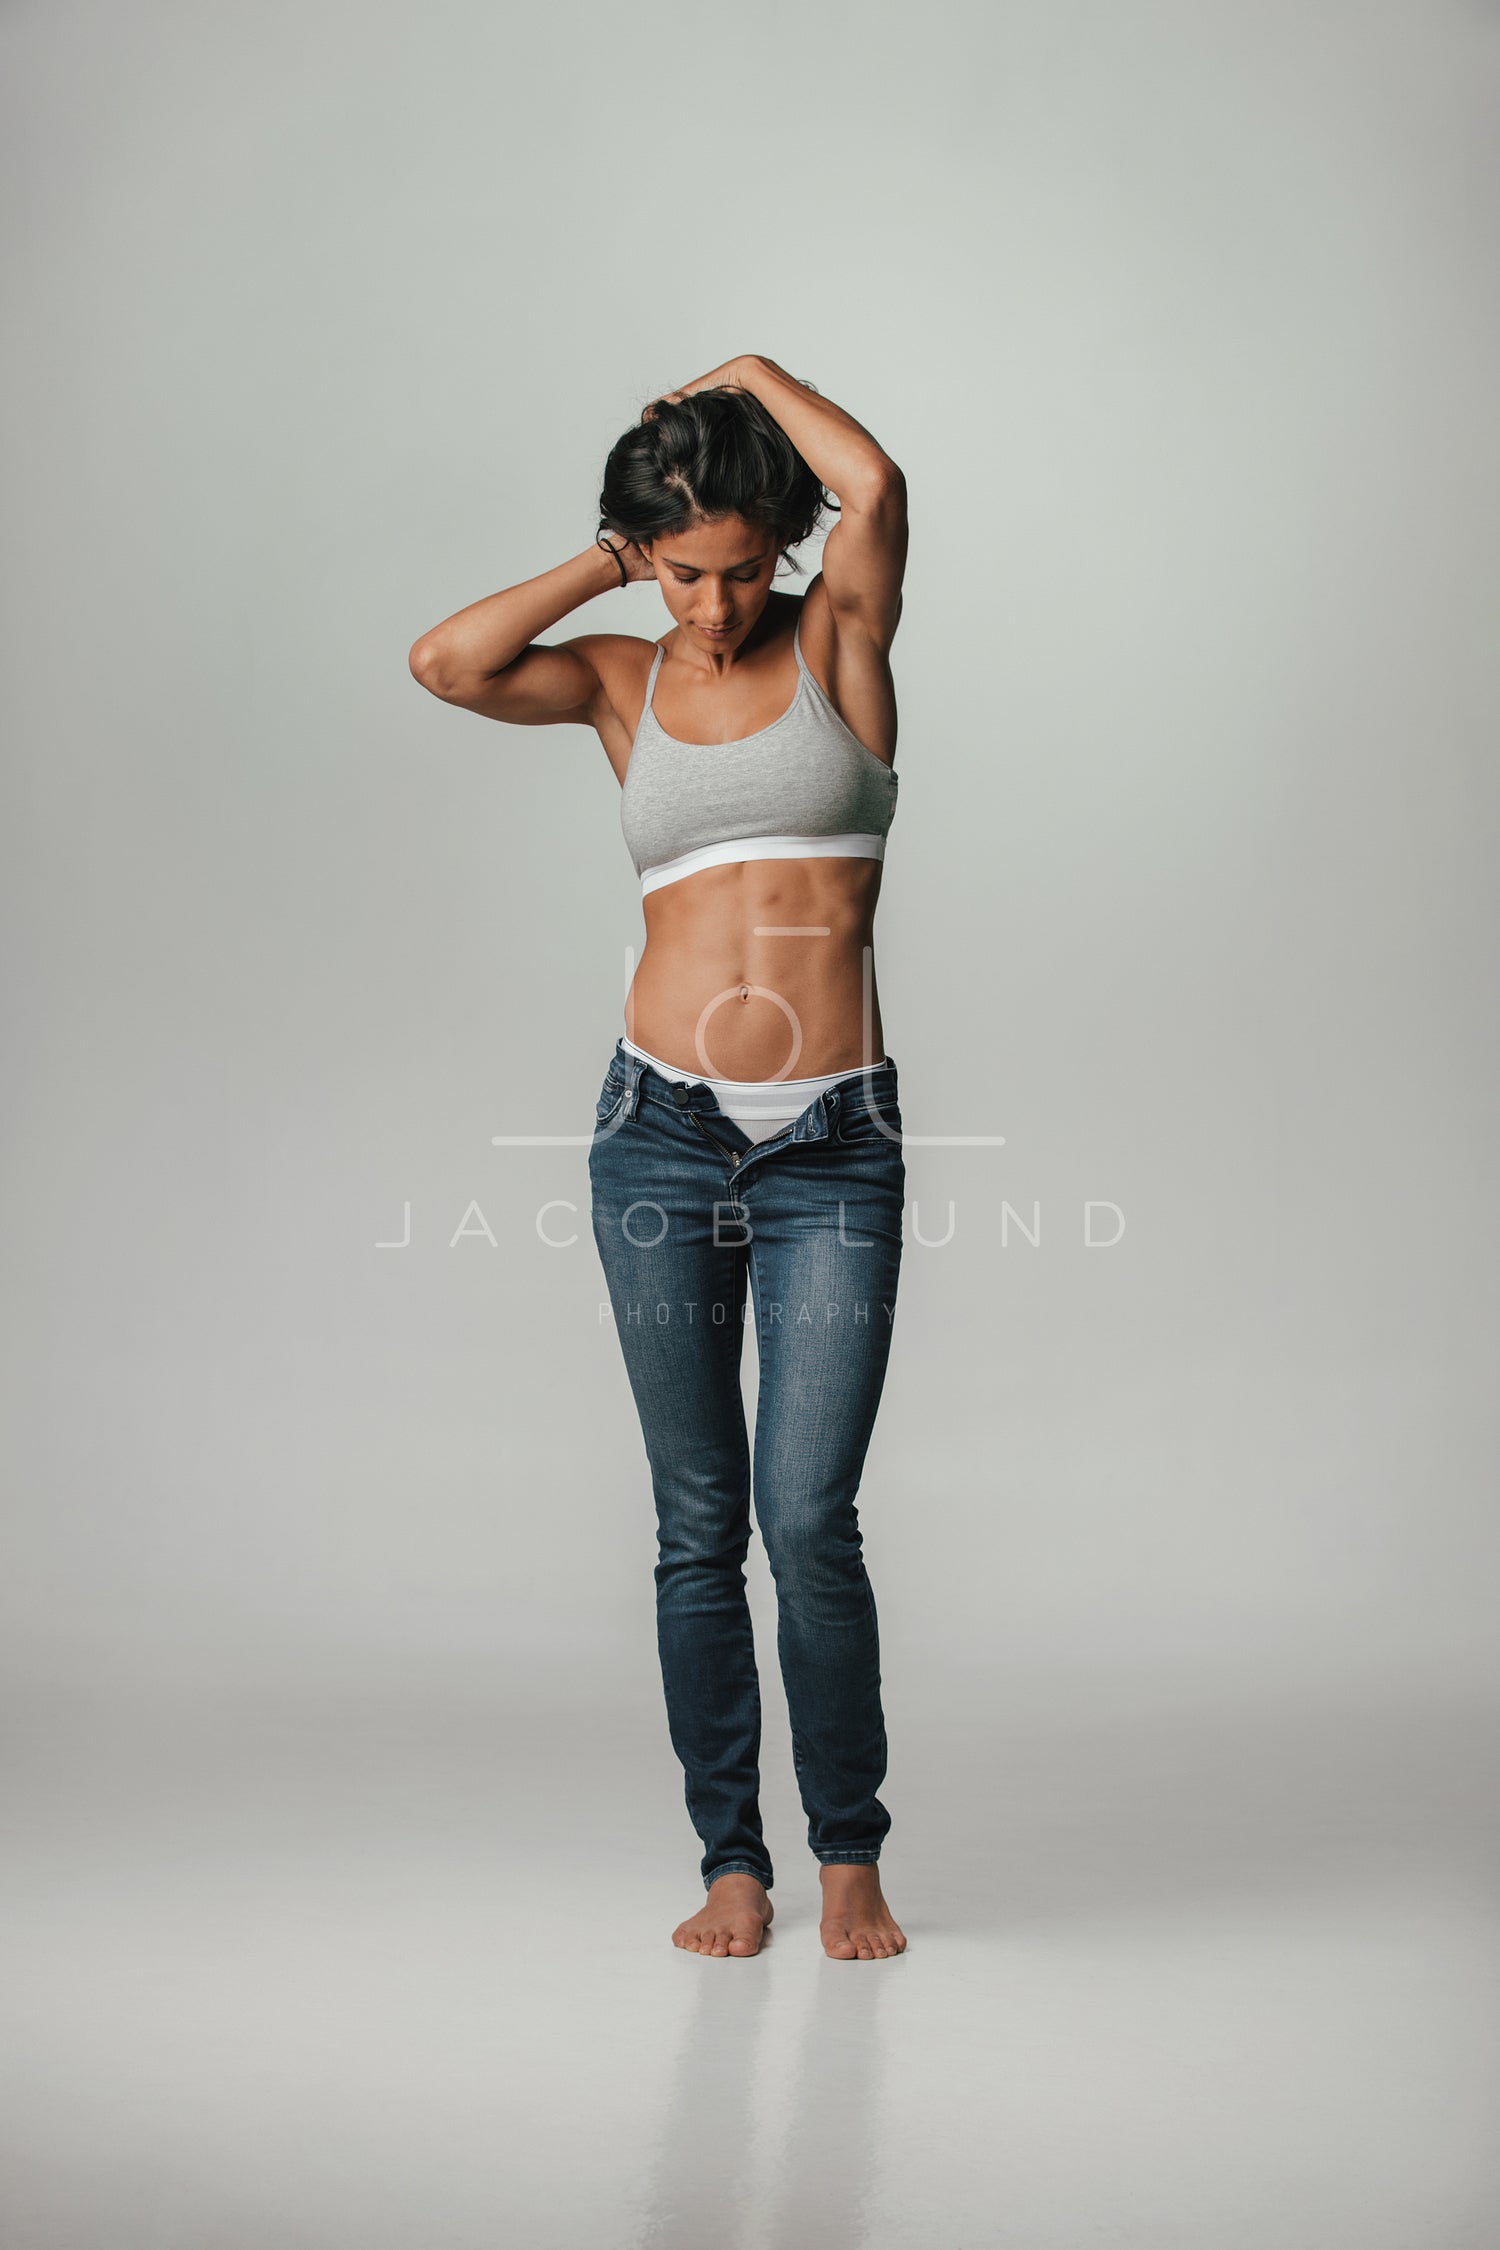 Trendy young woman posing in underwear and jeans – Jacob Lund Photography  Store- premium stock photo